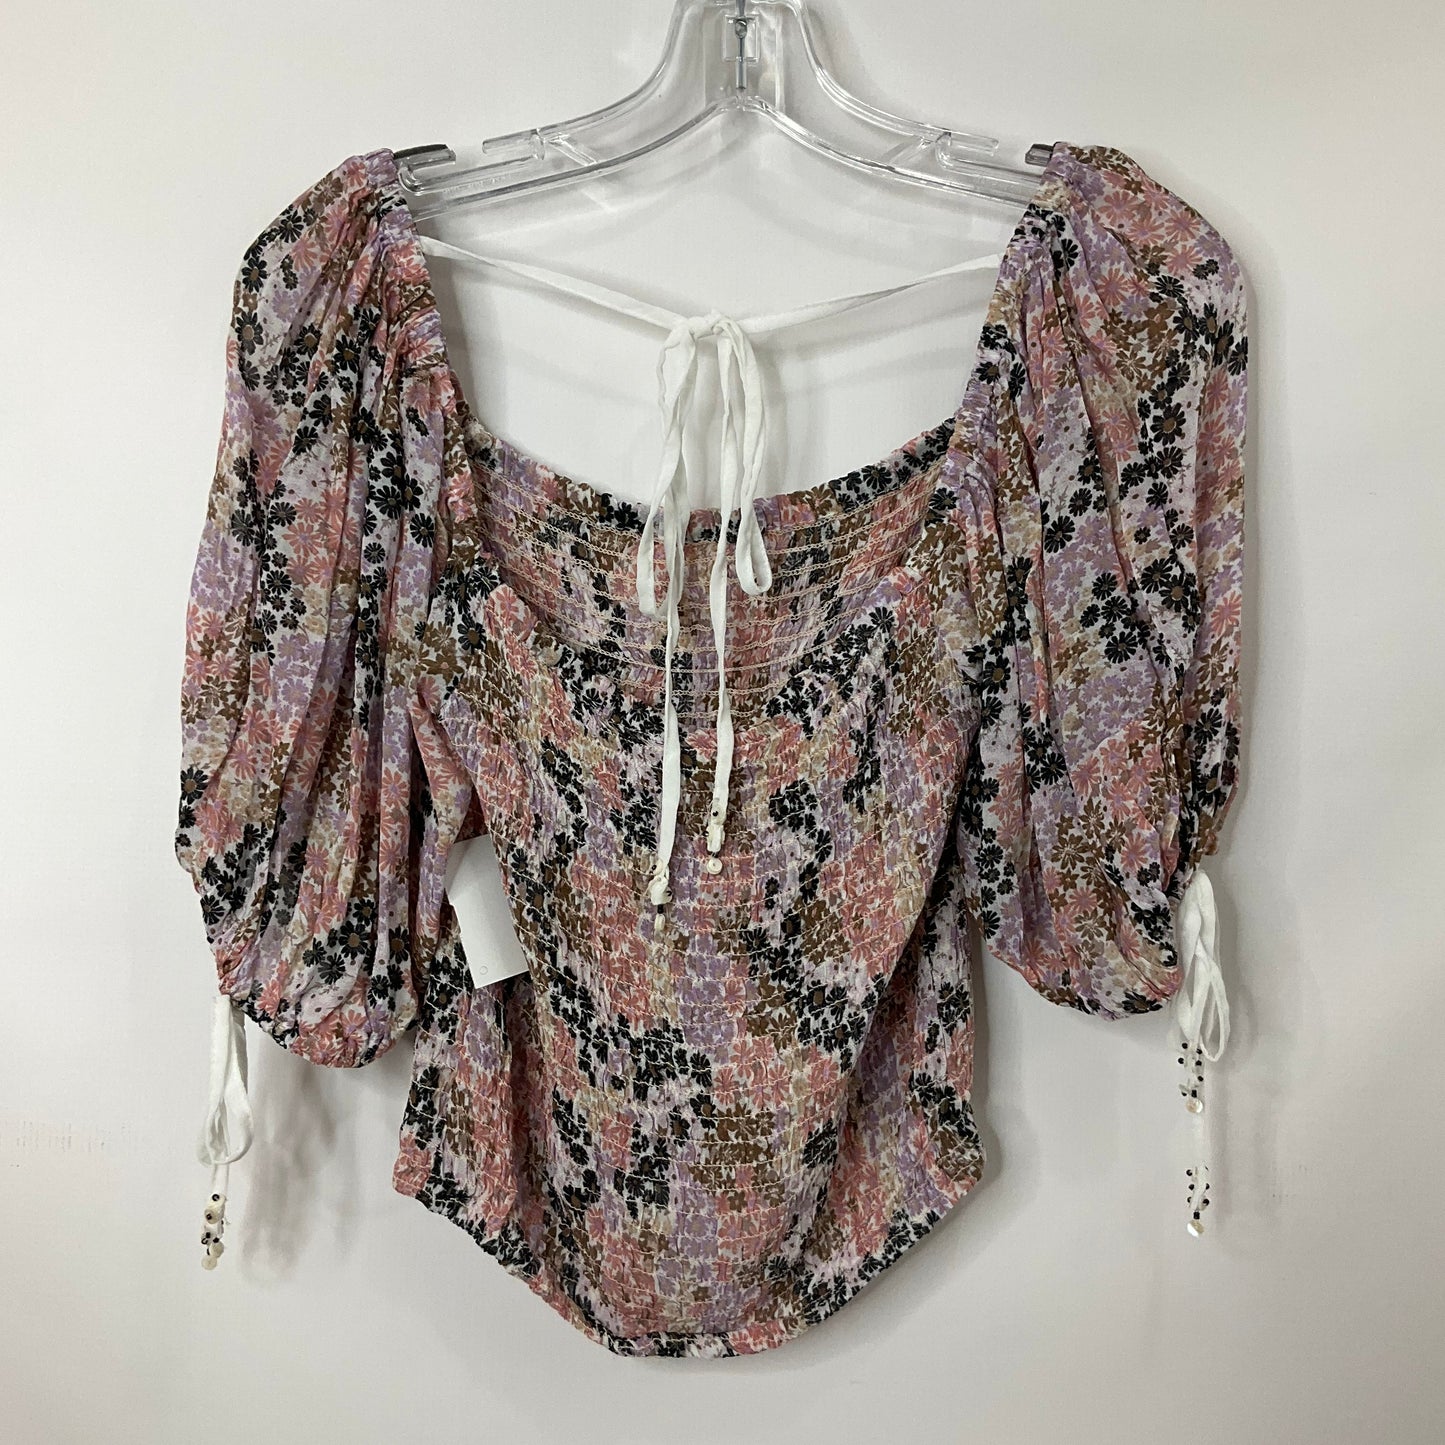 Floral Print Top Short Sleeve Free People, Size Xs